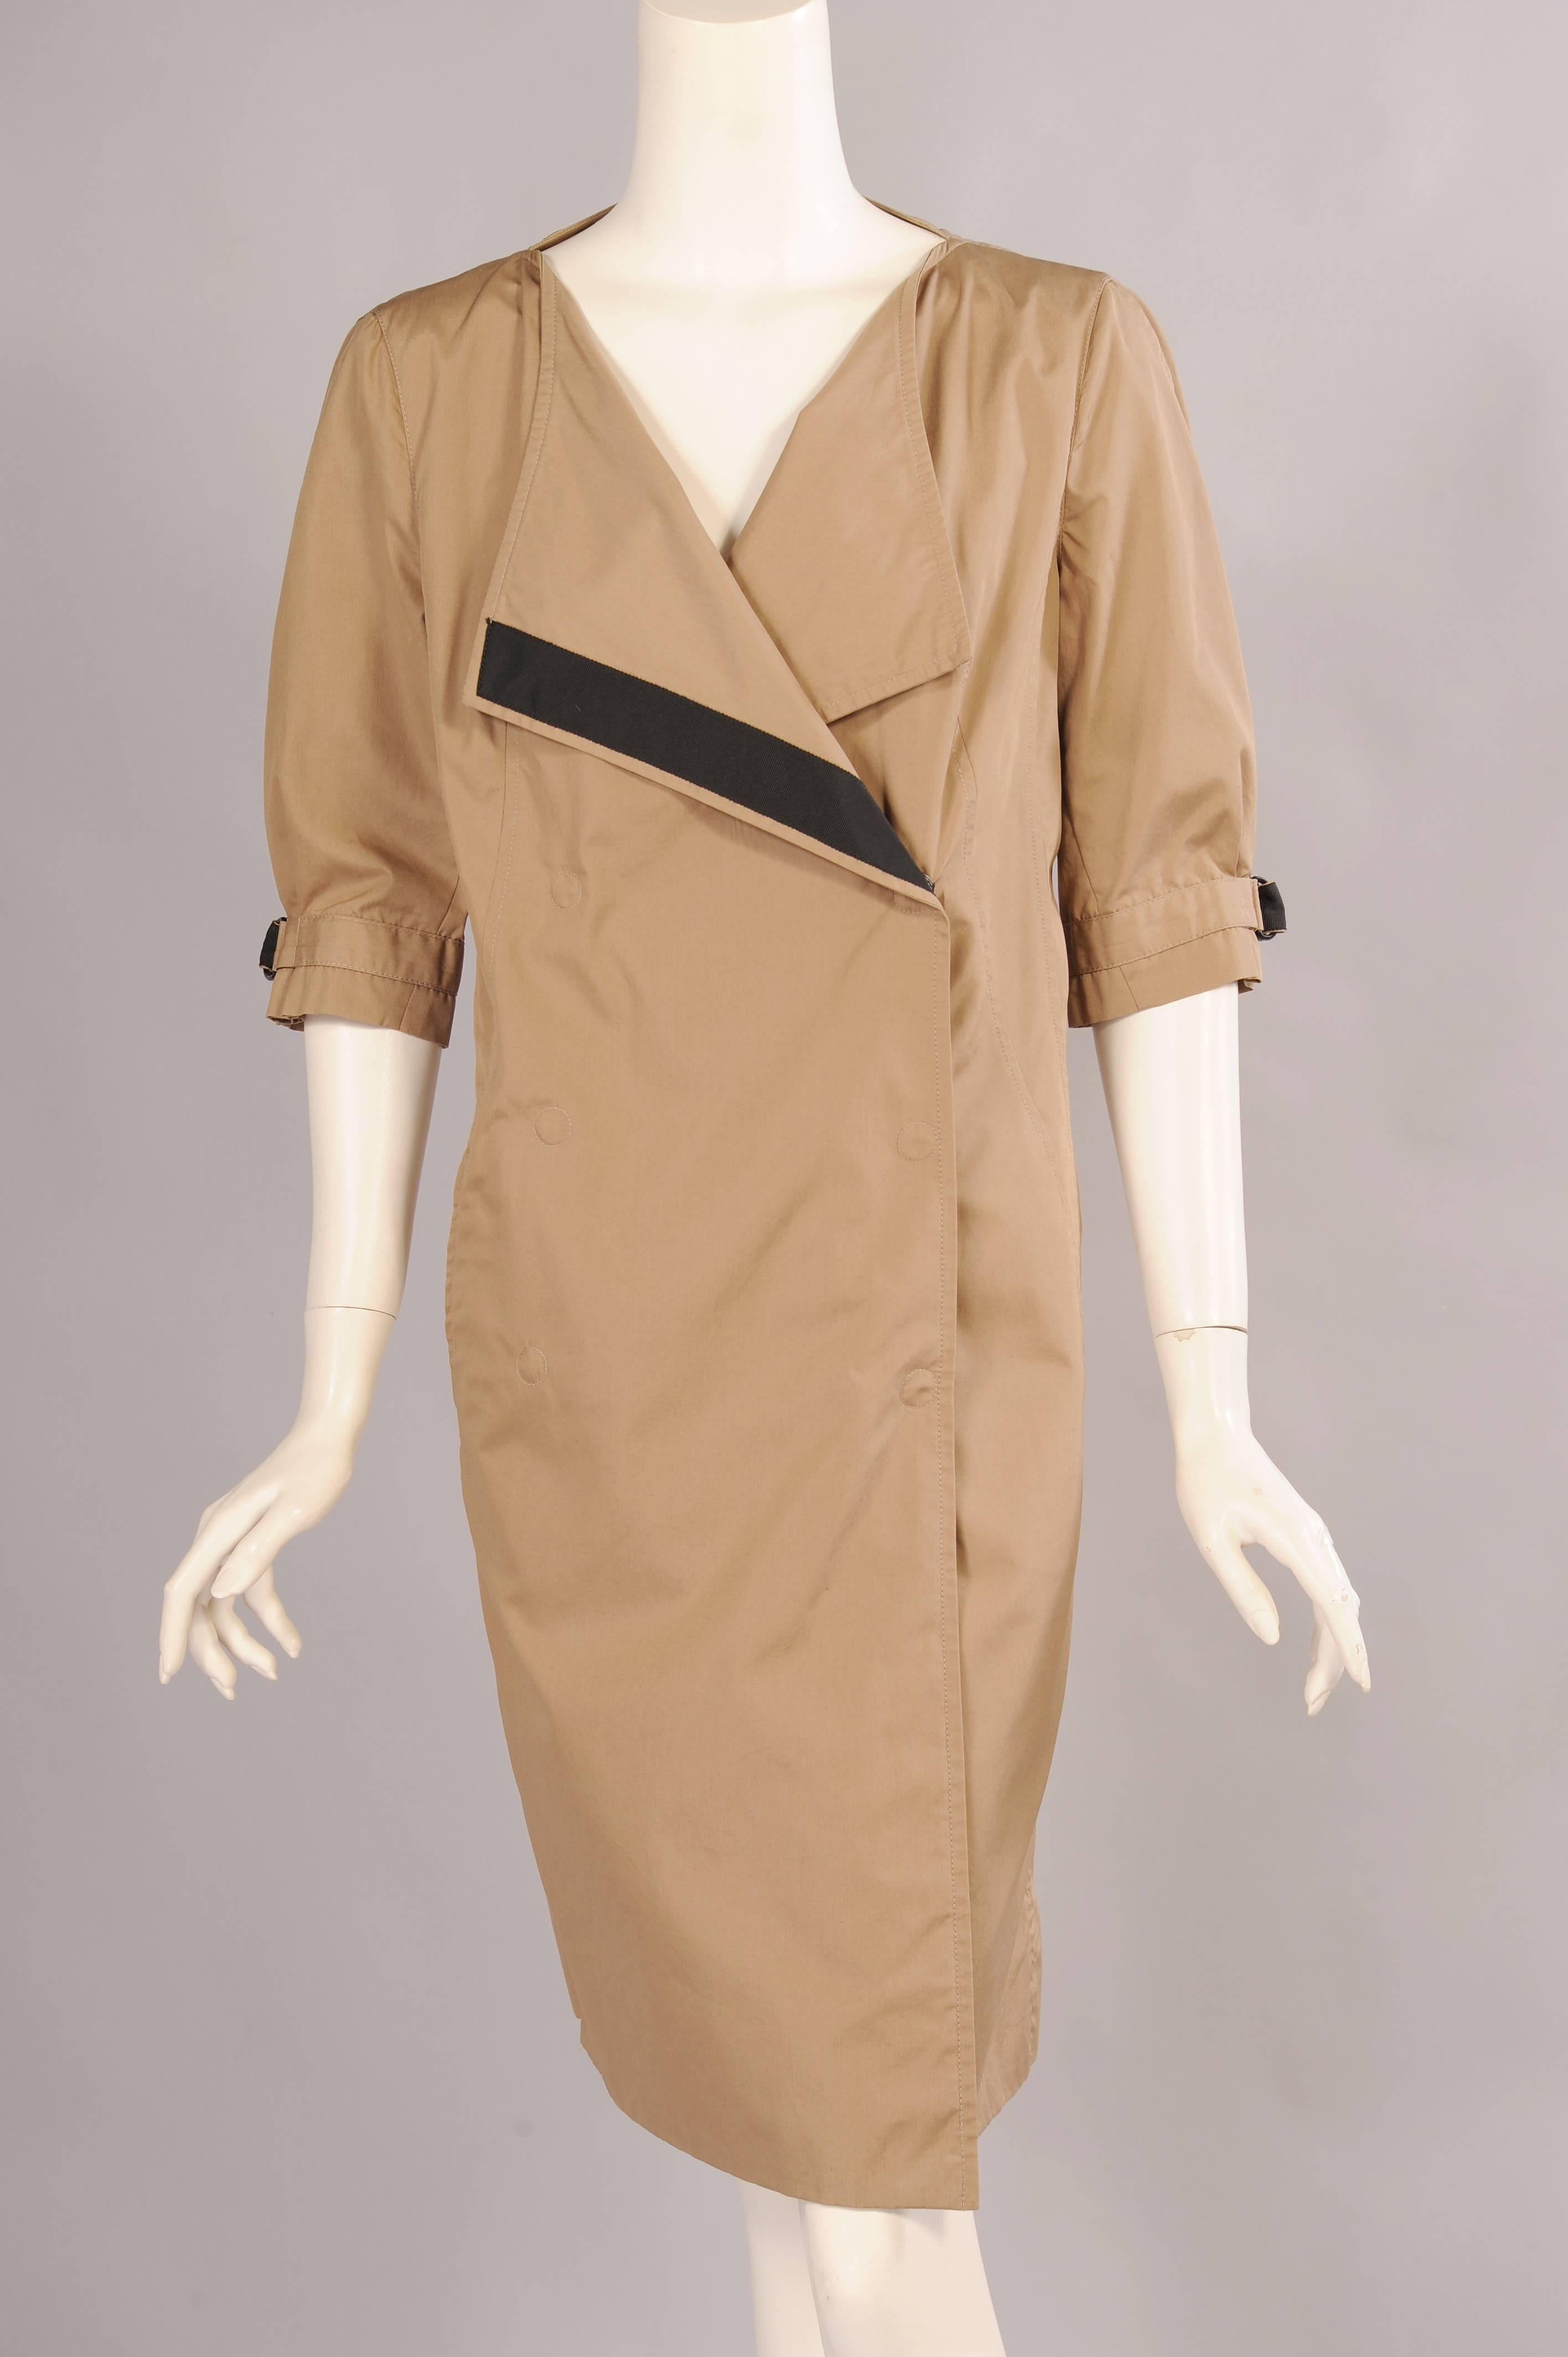 A classic khaki colored cotton day dress is updated with an open neckline, black grosgrain ribbon trim, and a concealed snap closure. The dres has elbow length sleeves with D Rings echoing the closure on the belt. Two pockets are concealed in the